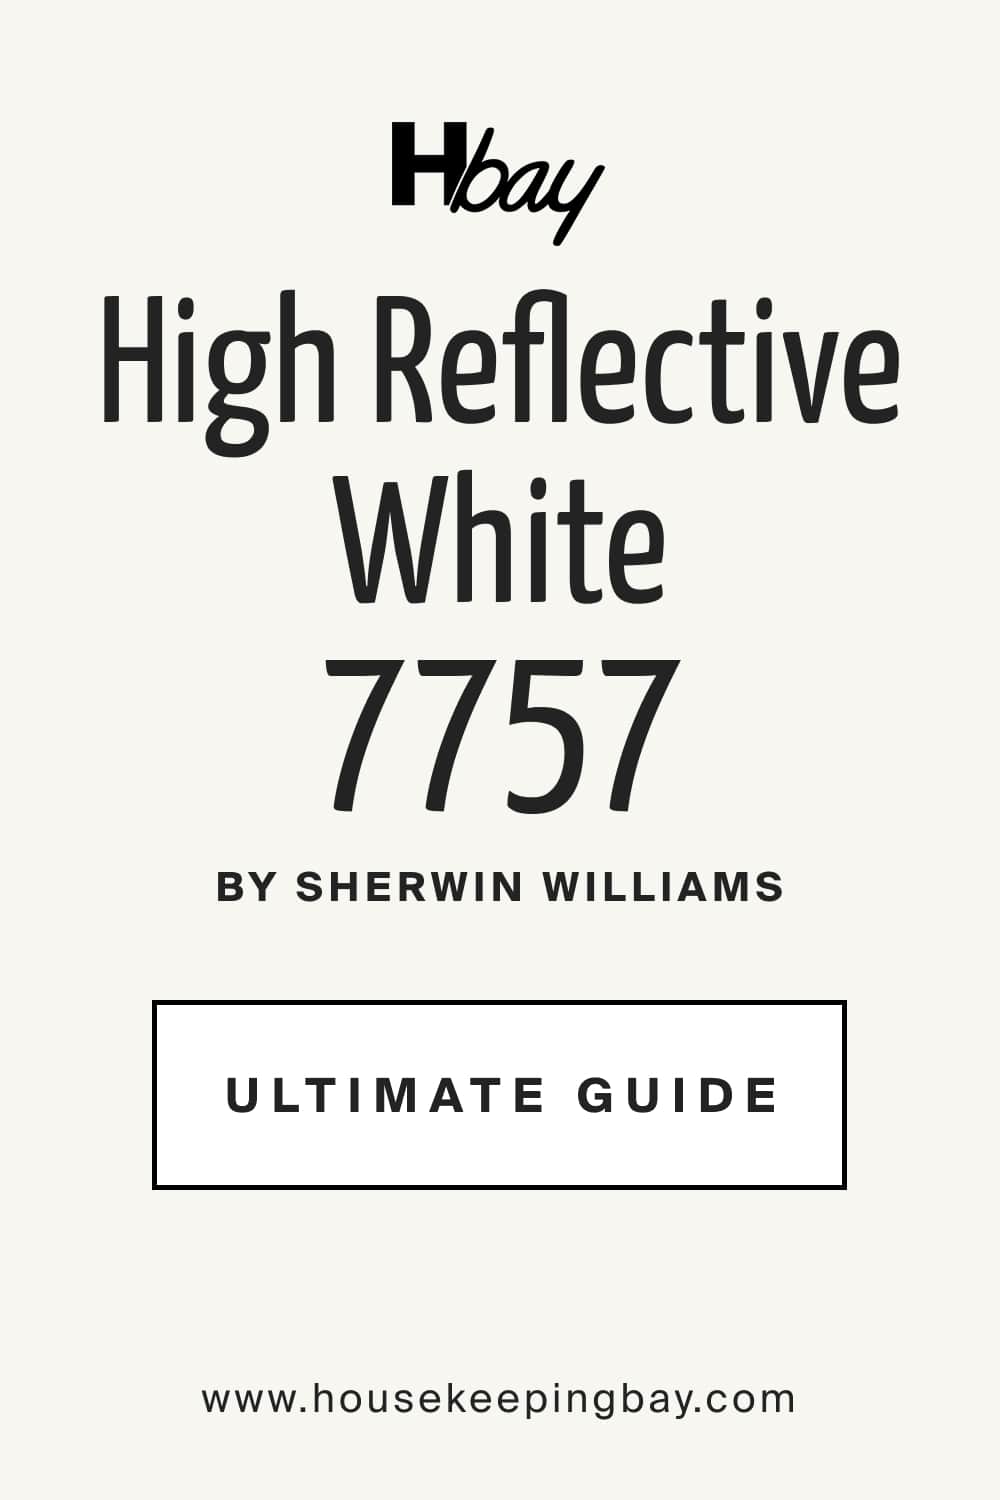 High Reflective White SW 7757 by Sherwin Williams Ultimate Guide